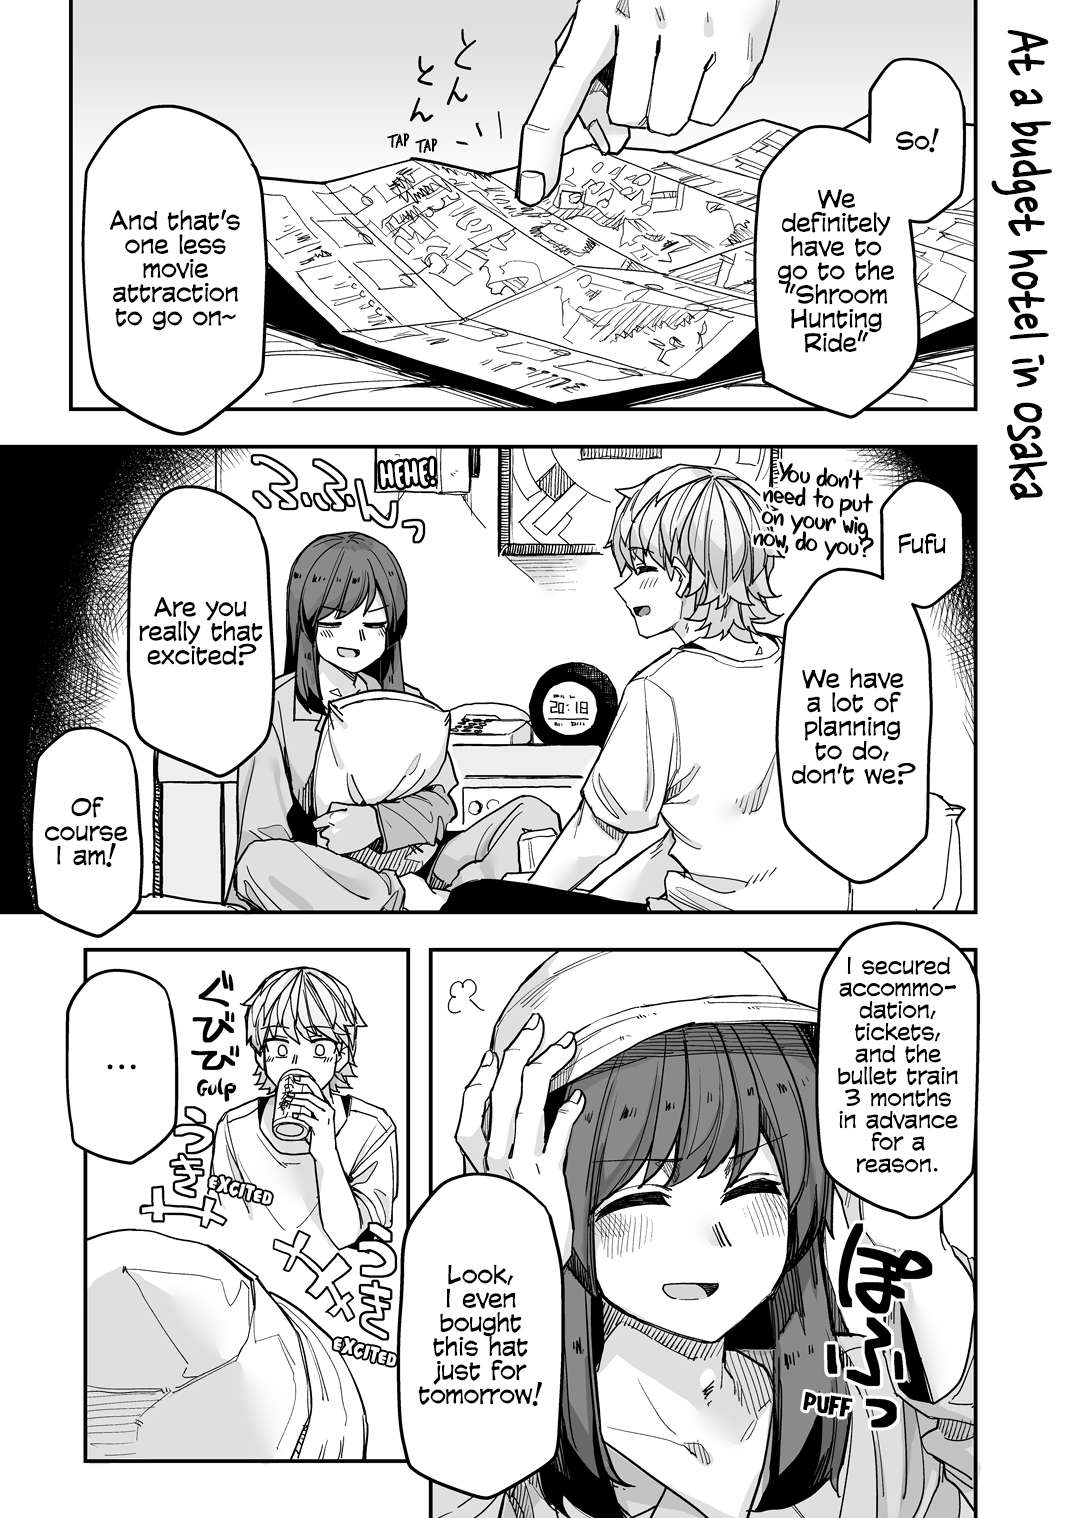 While Cross-Dressing, I Was Hit On By A Handsome Guy! - chapter 110 - #1